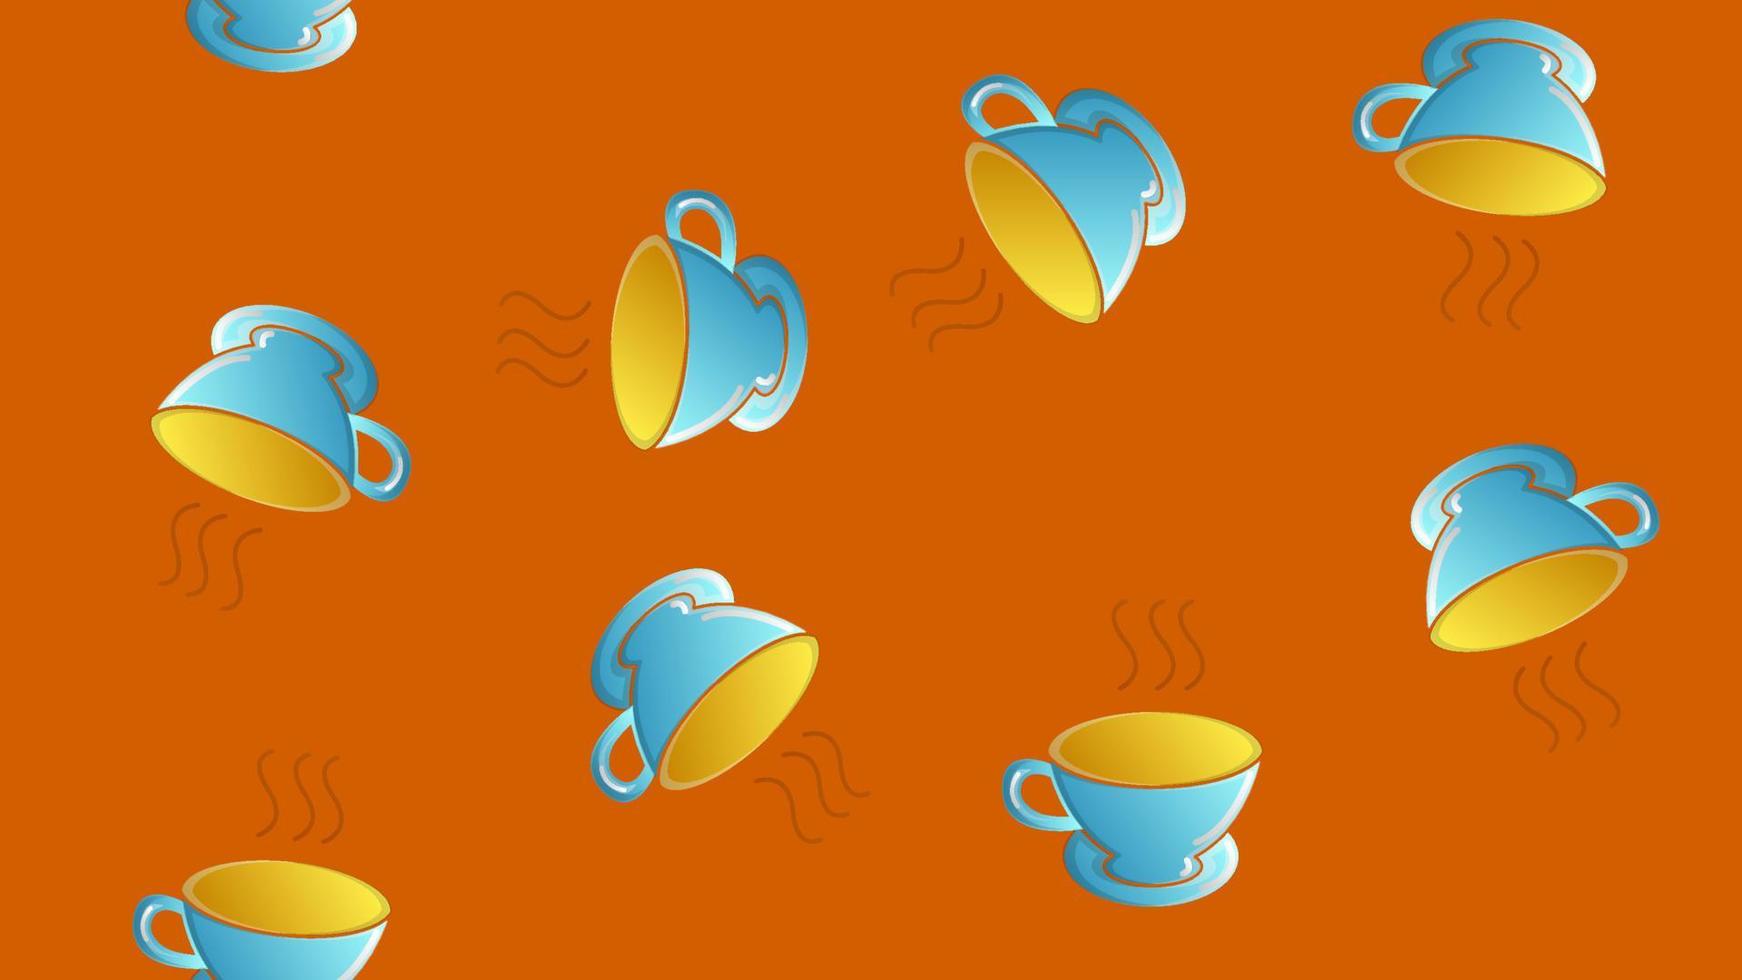 Endless seamless pattern of beautiful tasty hot invigorating morning fast coffee glasses on a yellow background. Vector illustration